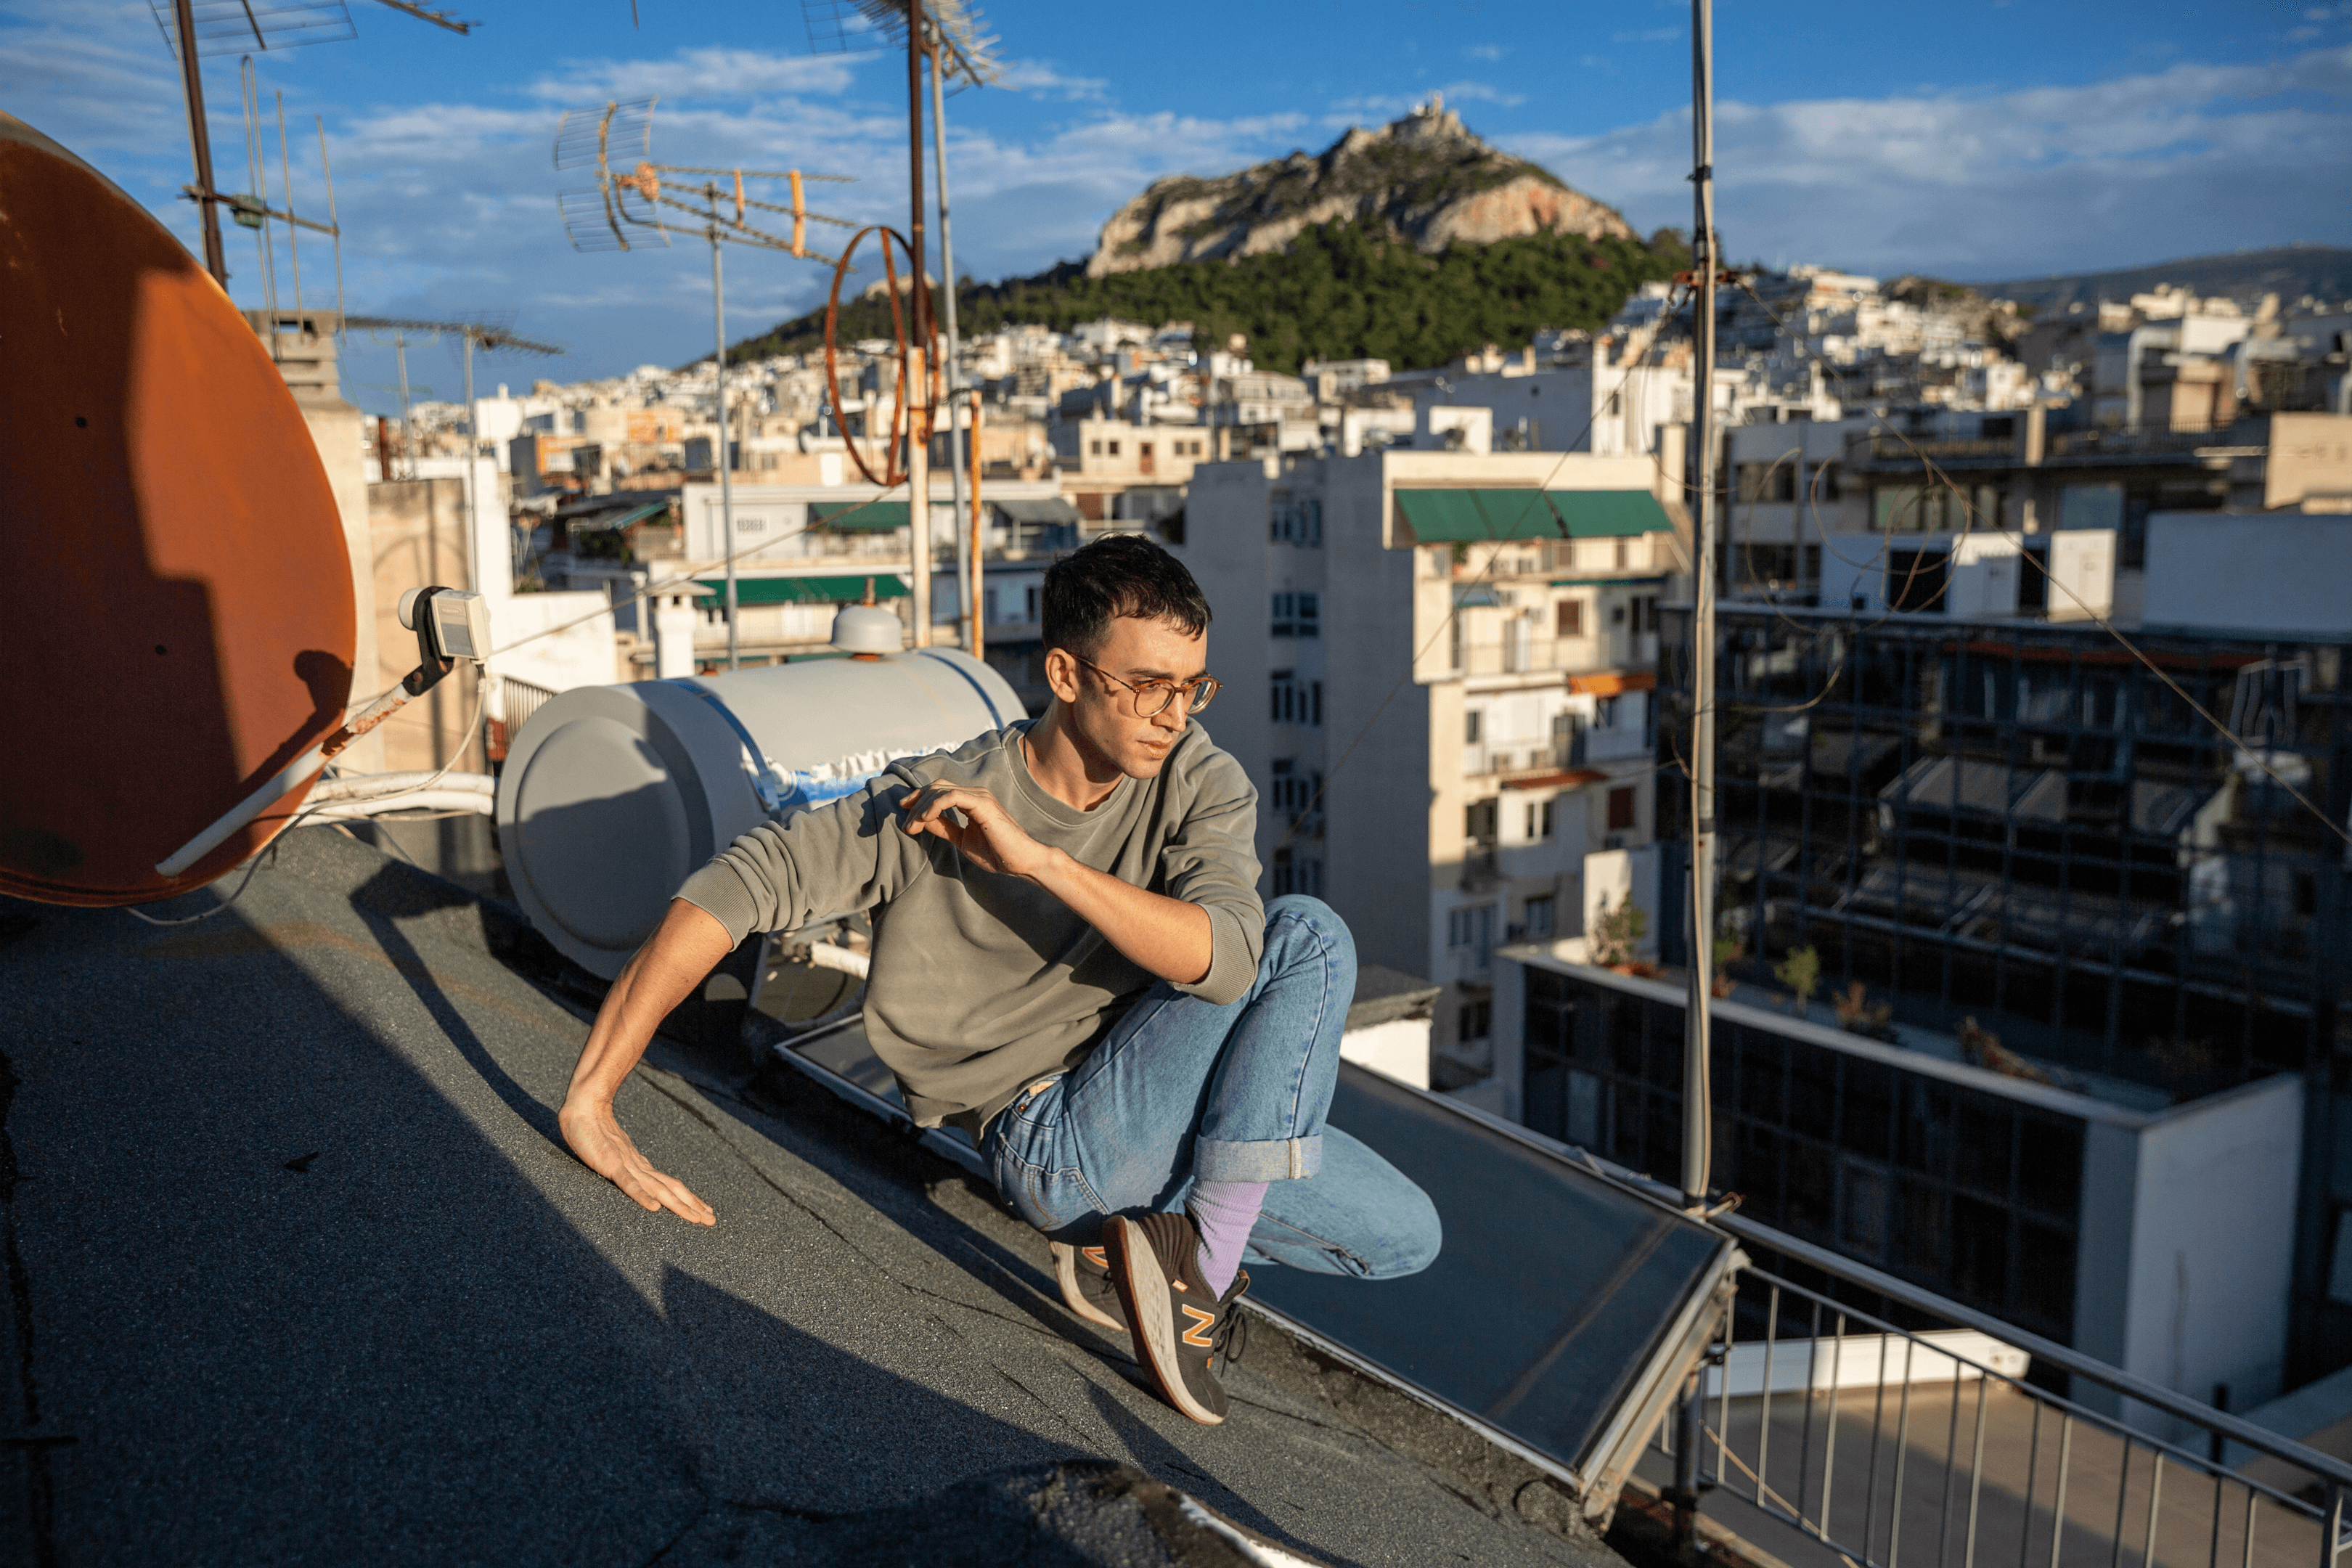 Dancers on Rooftops #76 - Thanos (Greece, 2021)